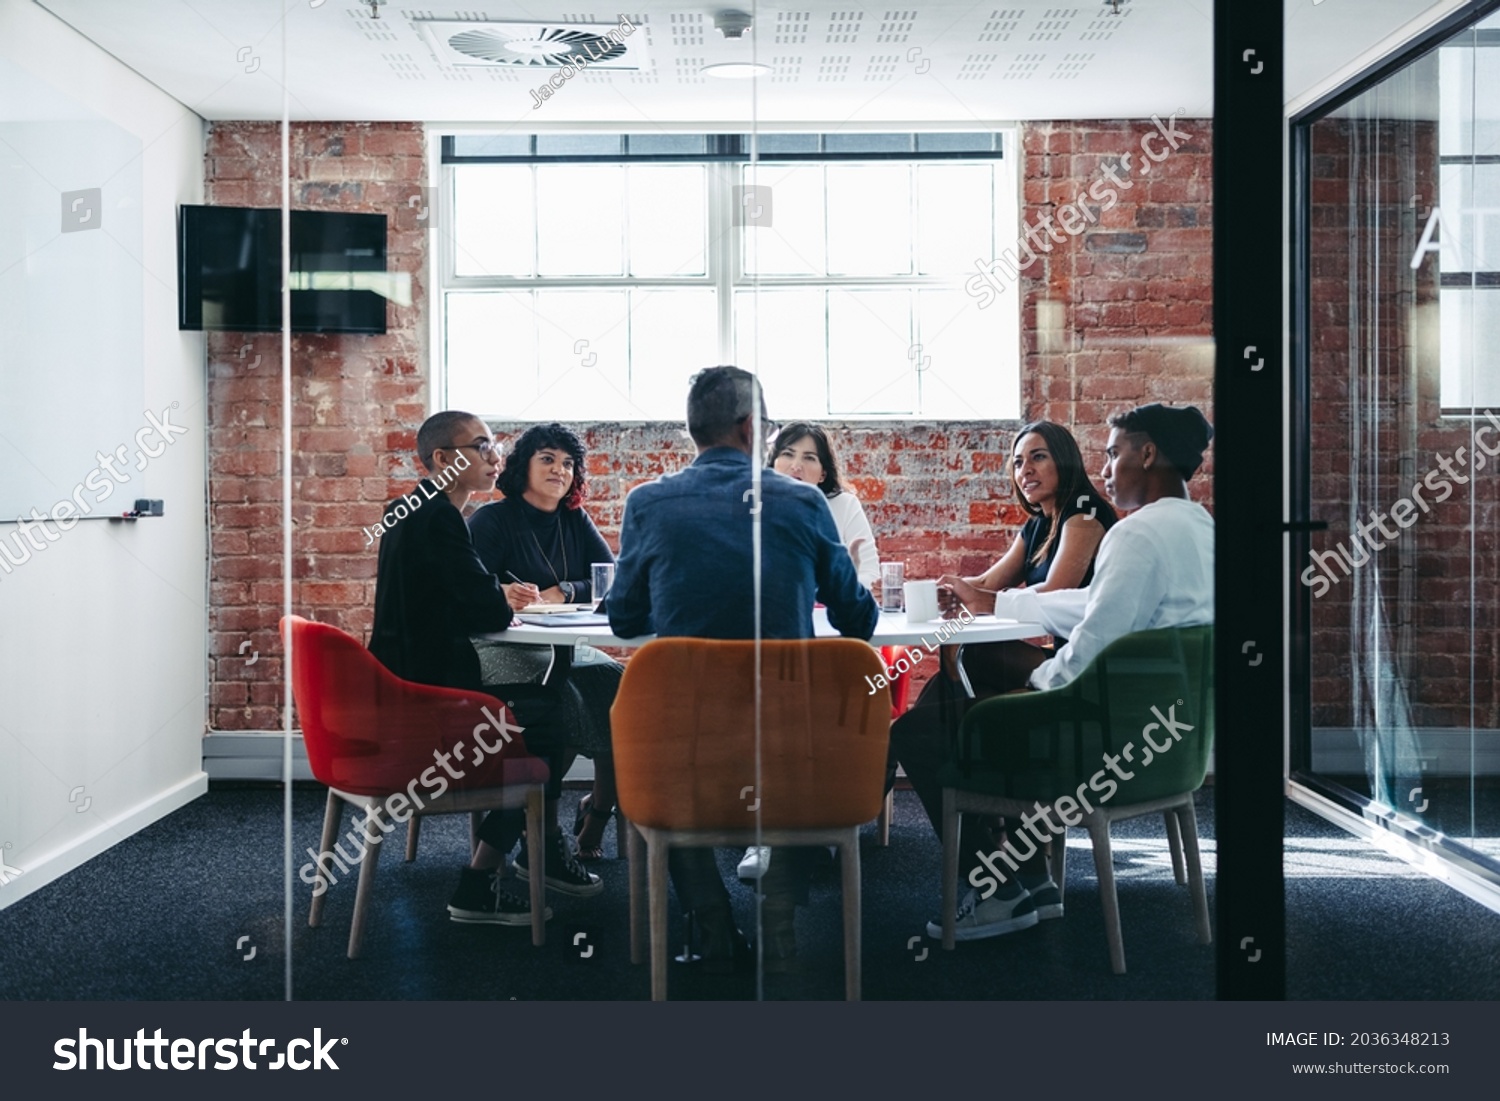 Businesspeople attending their morning briefing in a modern office. Group of creative businesspeople having a discussion during a meeting. Businesspeople working together as a team. #2036348213